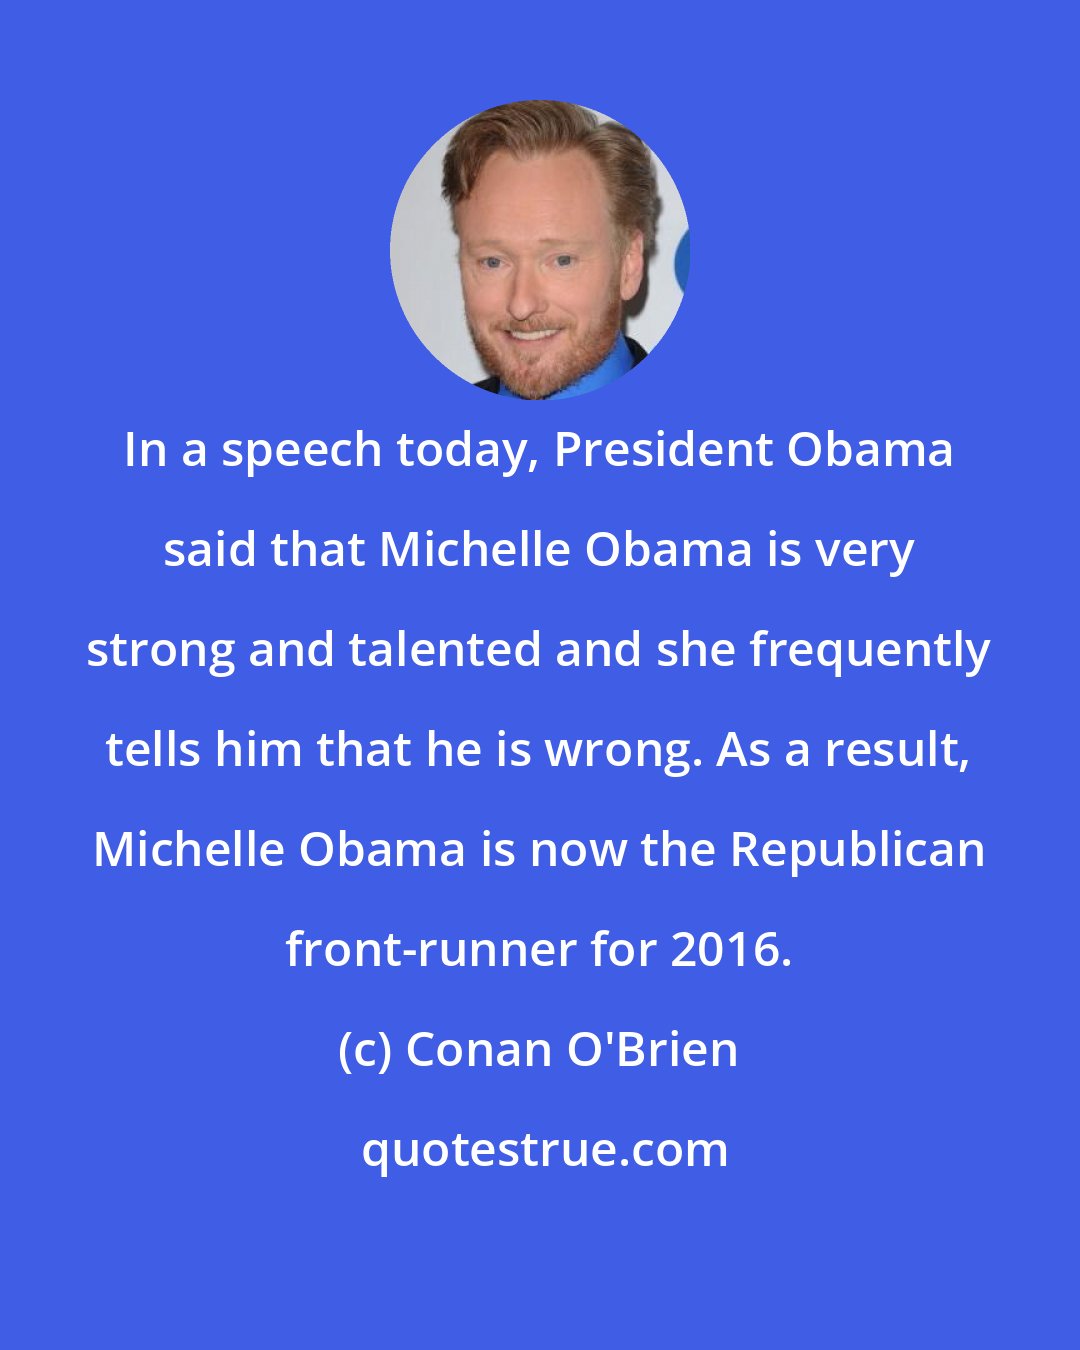 Conan O'Brien: In a speech today, President Obama said that Michelle Obama is very strong and talented and she frequently tells him that he is wrong. As a result, Michelle Obama is now the Republican front-runner for 2016.